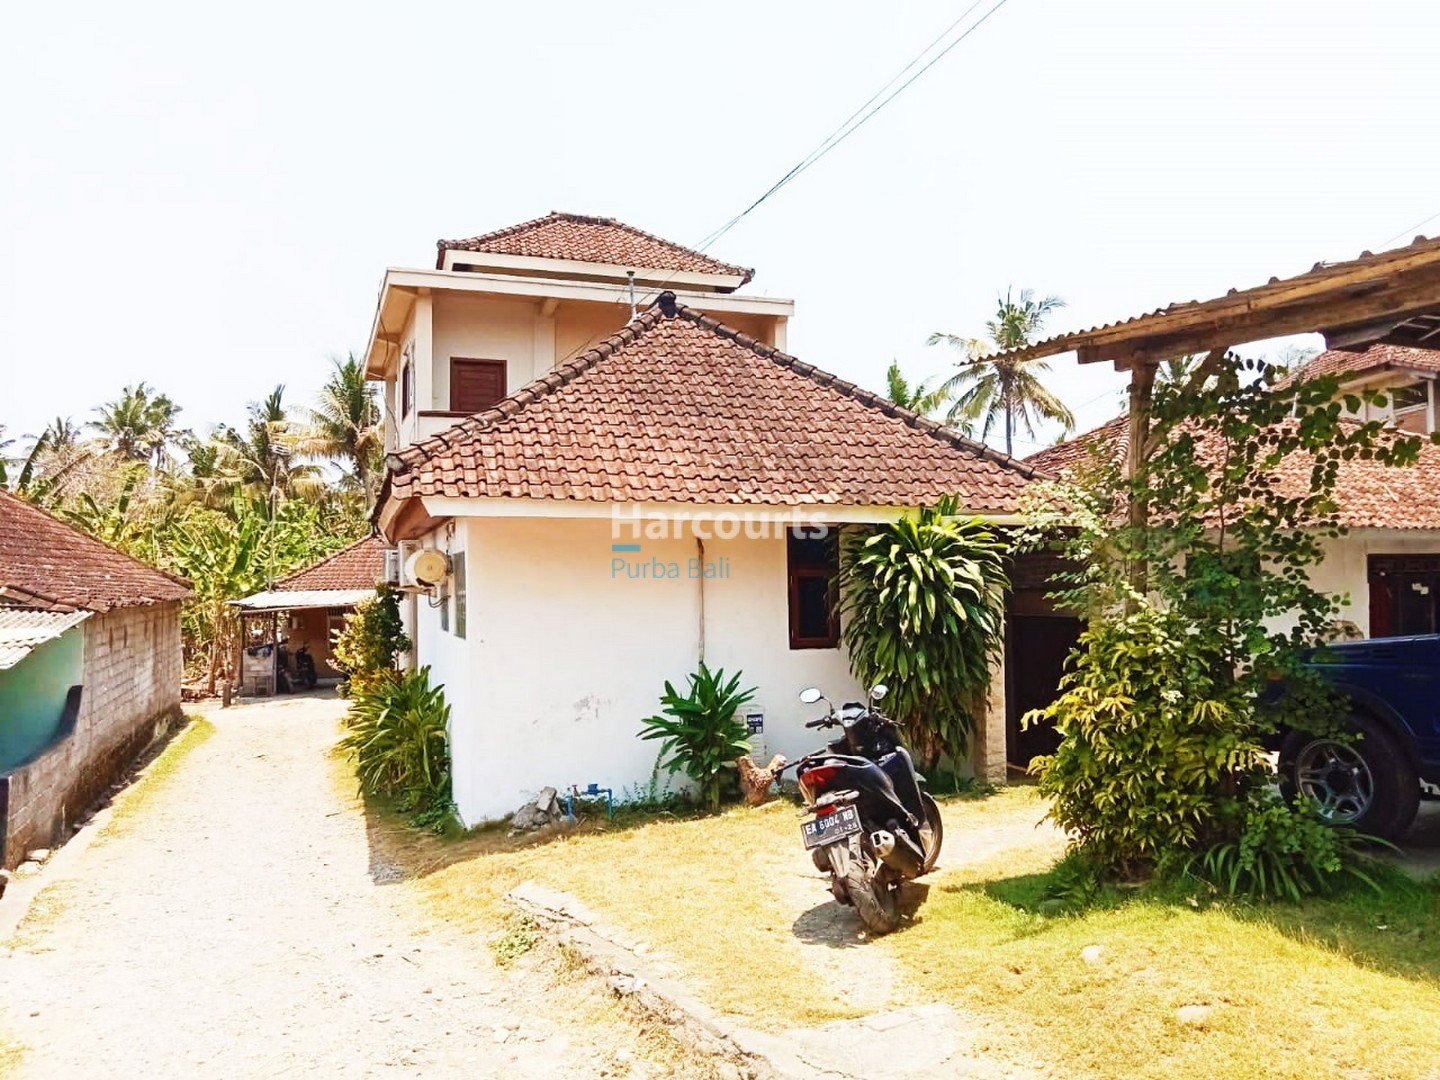 Medewi Beach Property 150m from the beach, 4-Bedroom Bali Freehold